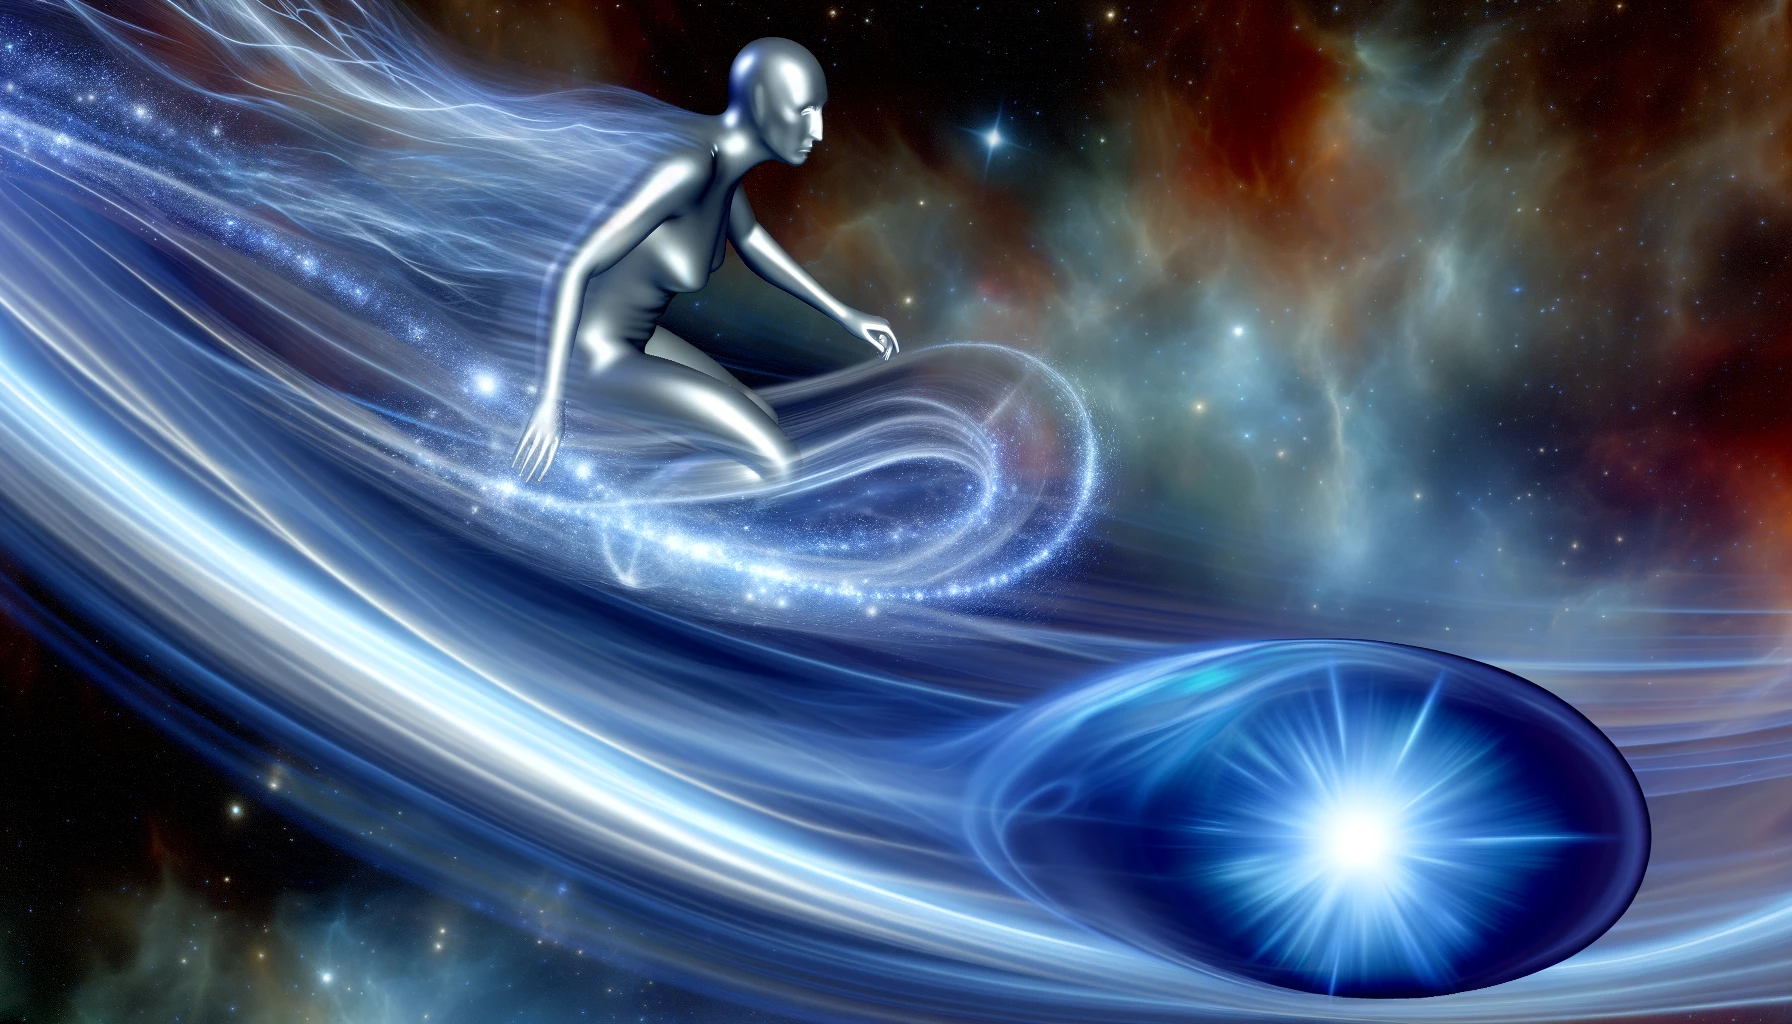 The Silver Surfer glides through the cosmos, with the Space Stone's energy guiding the path.